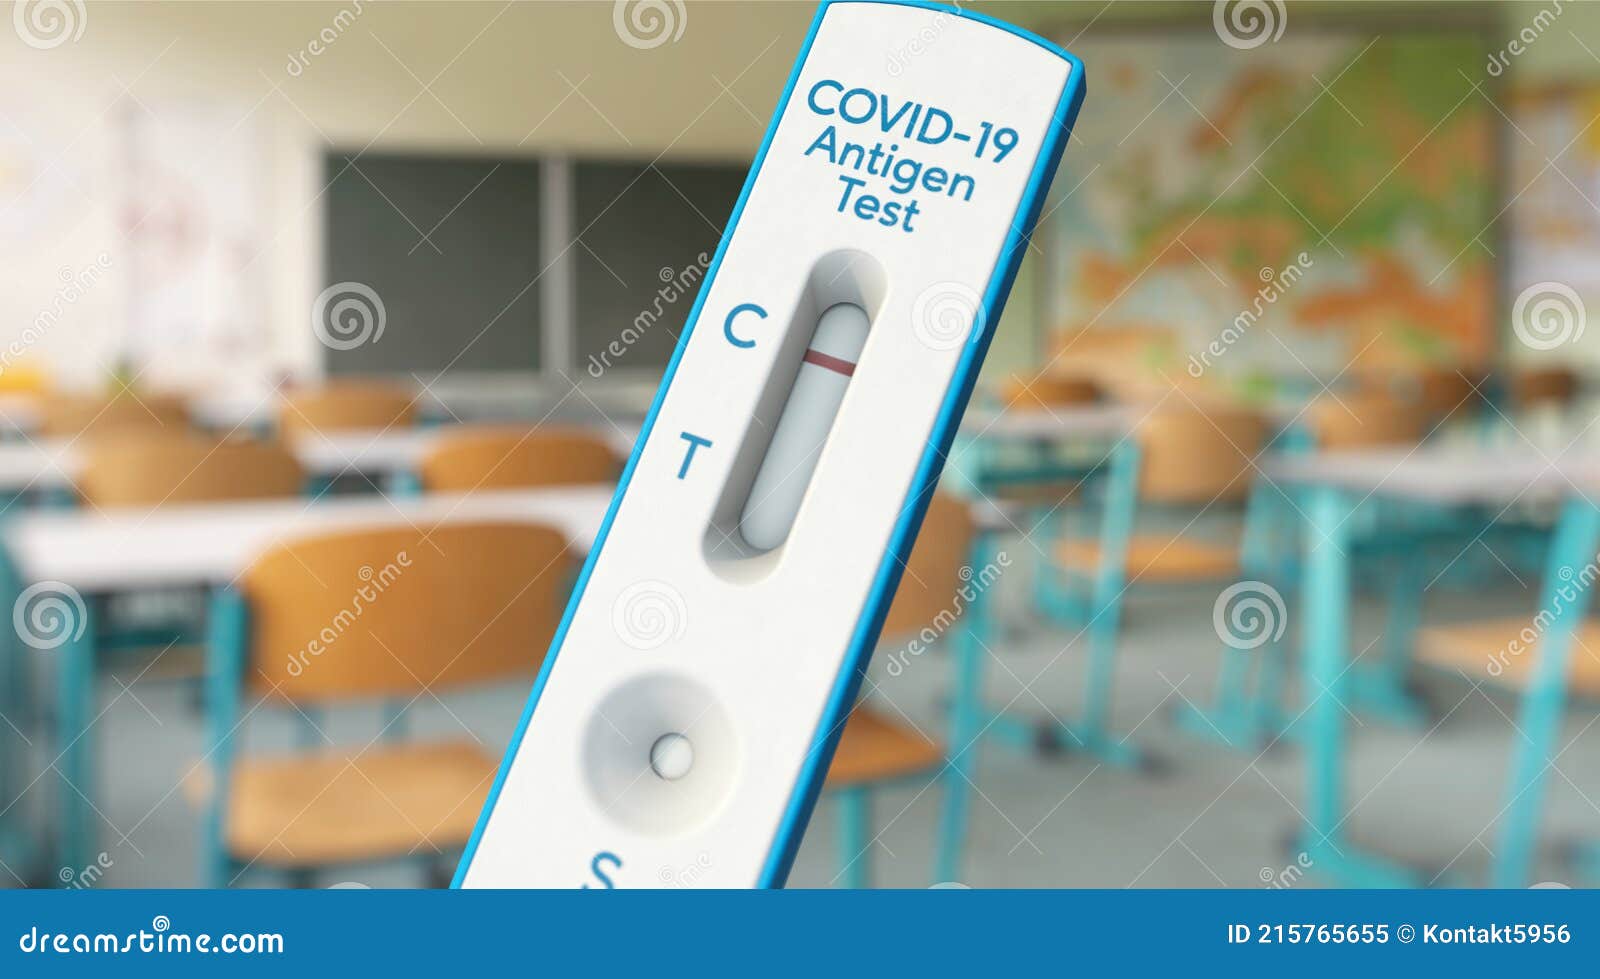 covid-19 test obligation in the school